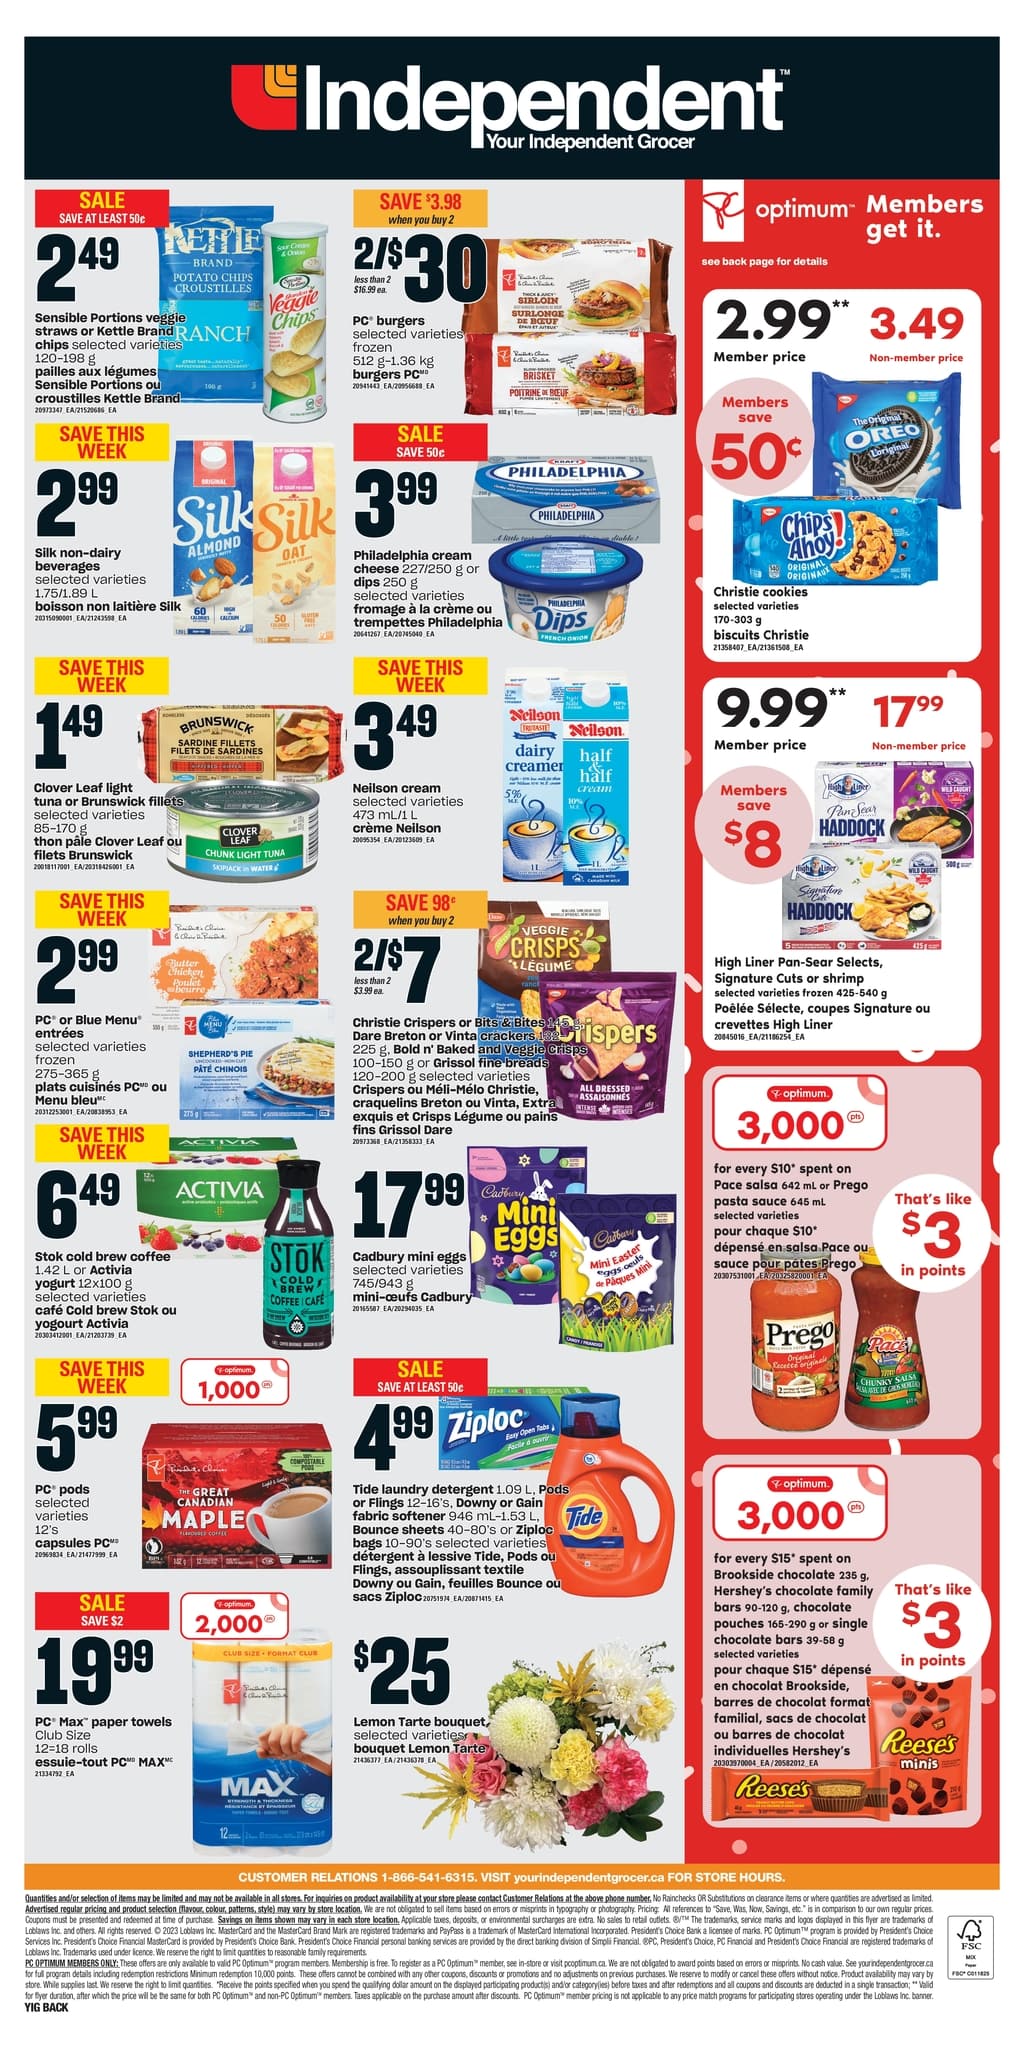 Independent - Ontario - Weekly Flyer Specials - Page 4